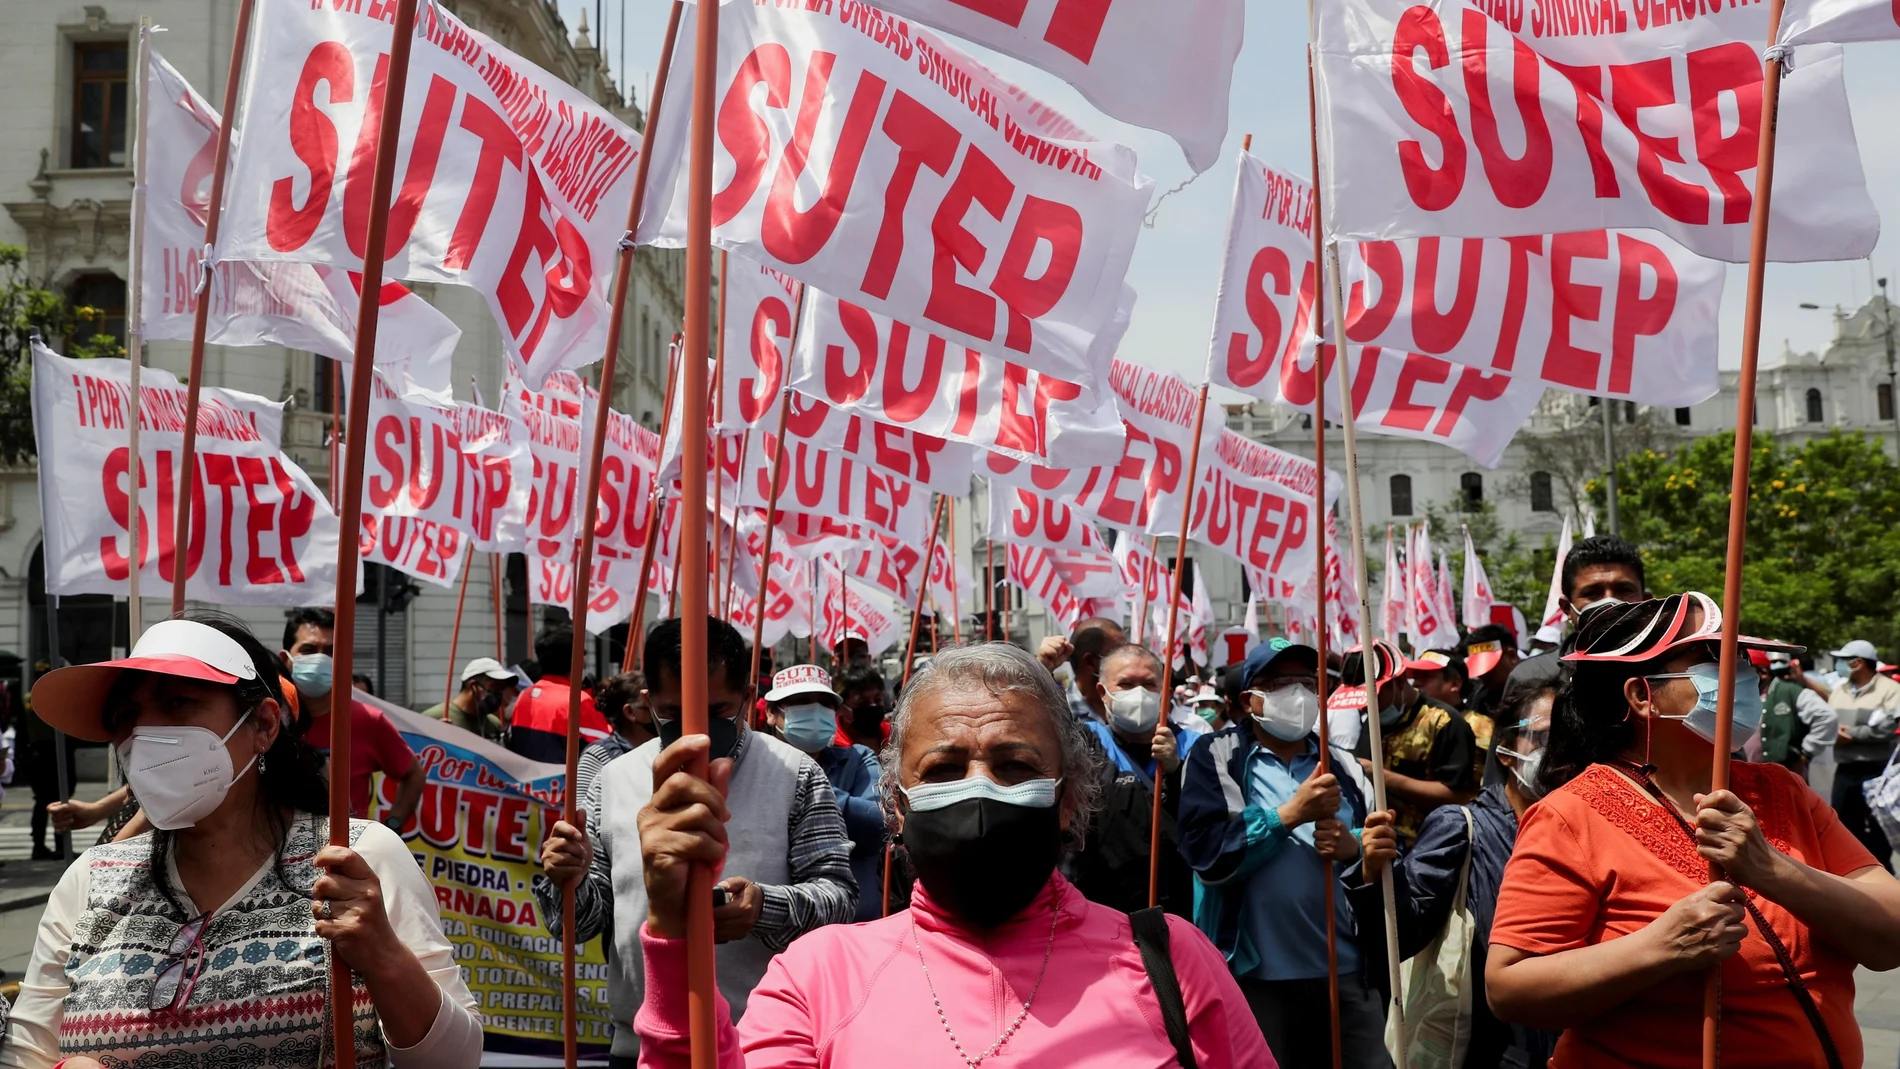 Public teachers from the Unitary Union of Education Workers of Peru (SUTEP) march to demand better working conditions in Lima, Peru, November 23, 2021. REUTERS/Sebastian Castaneda